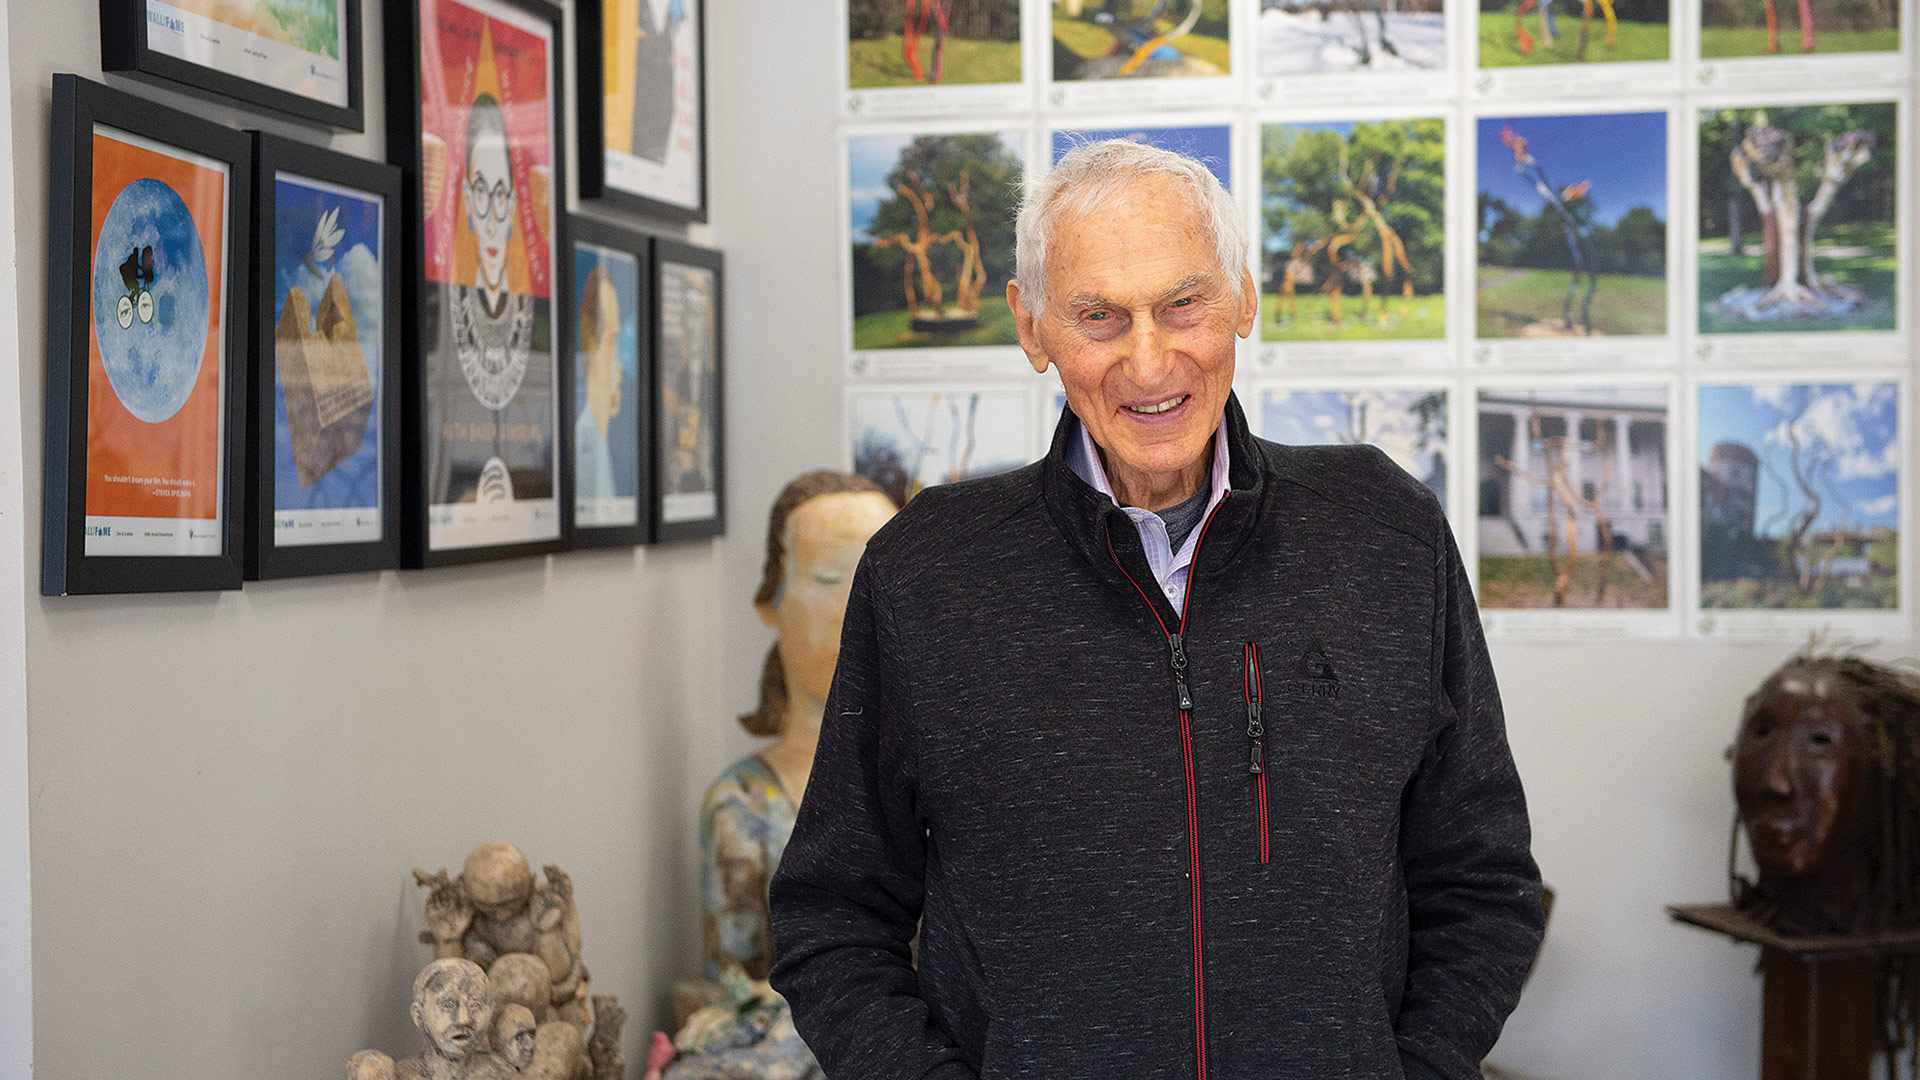 Behind Harold Grinspoon are photos